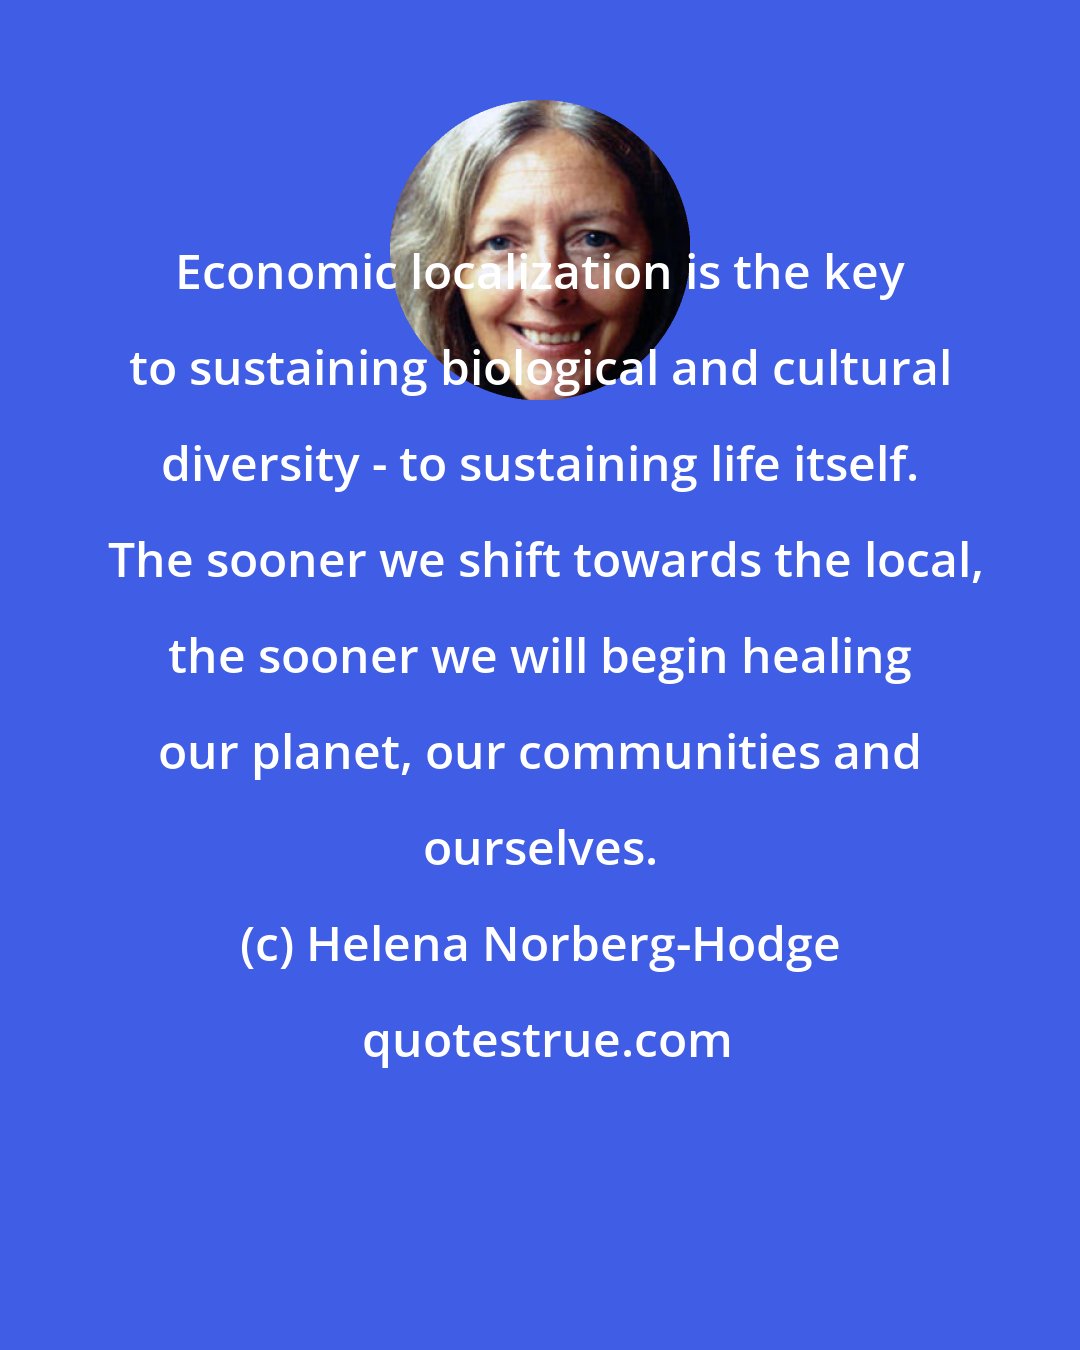 Helena Norberg-Hodge: Economic localization is the key to sustaining biological and cultural diversity - to sustaining life itself.  The sooner we shift towards the local, the sooner we will begin healing our planet, our communities and ourselves.